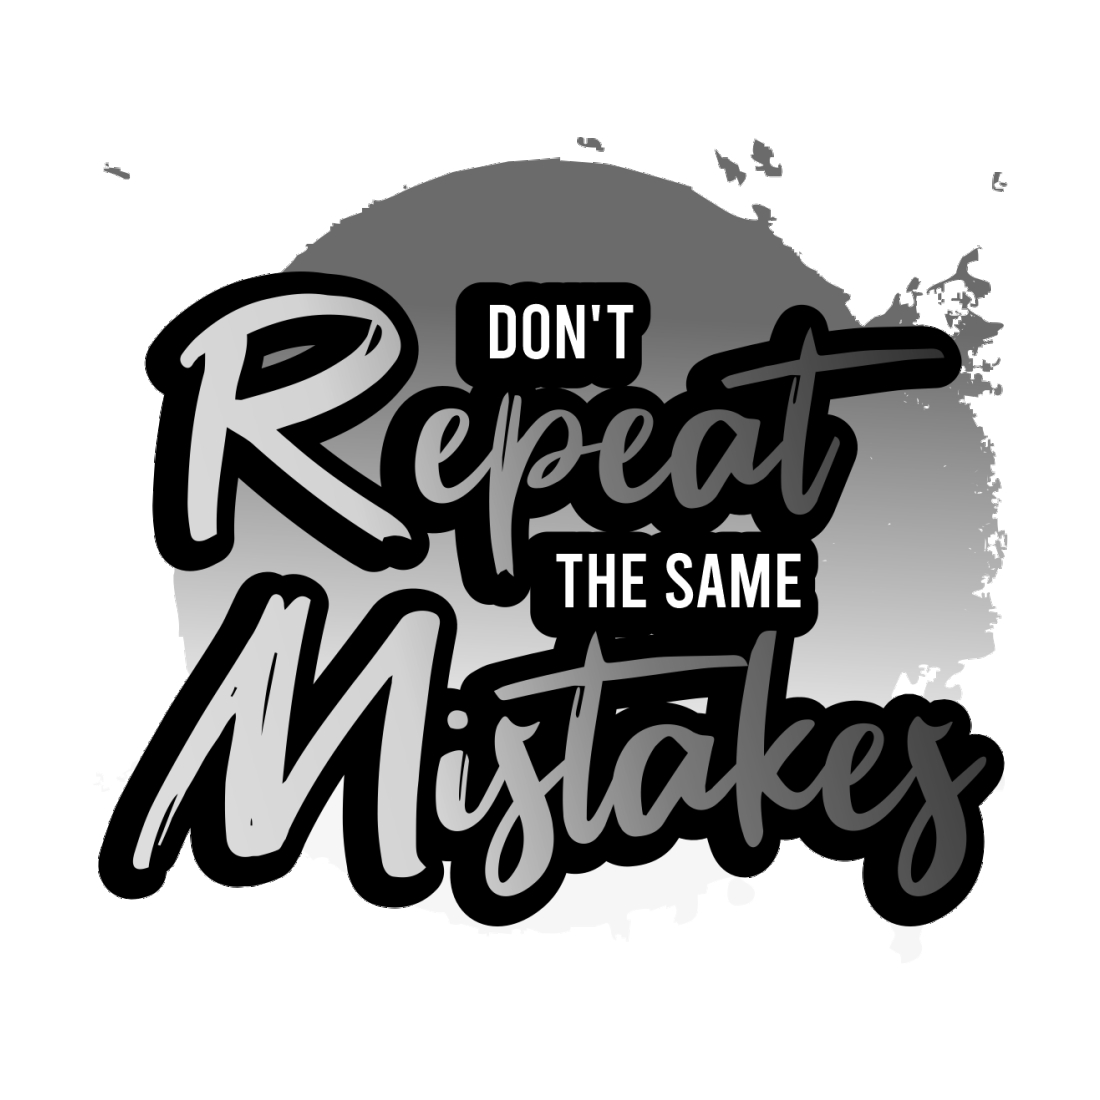 Don't Repeat the Same Mistakes T-shirt Design.